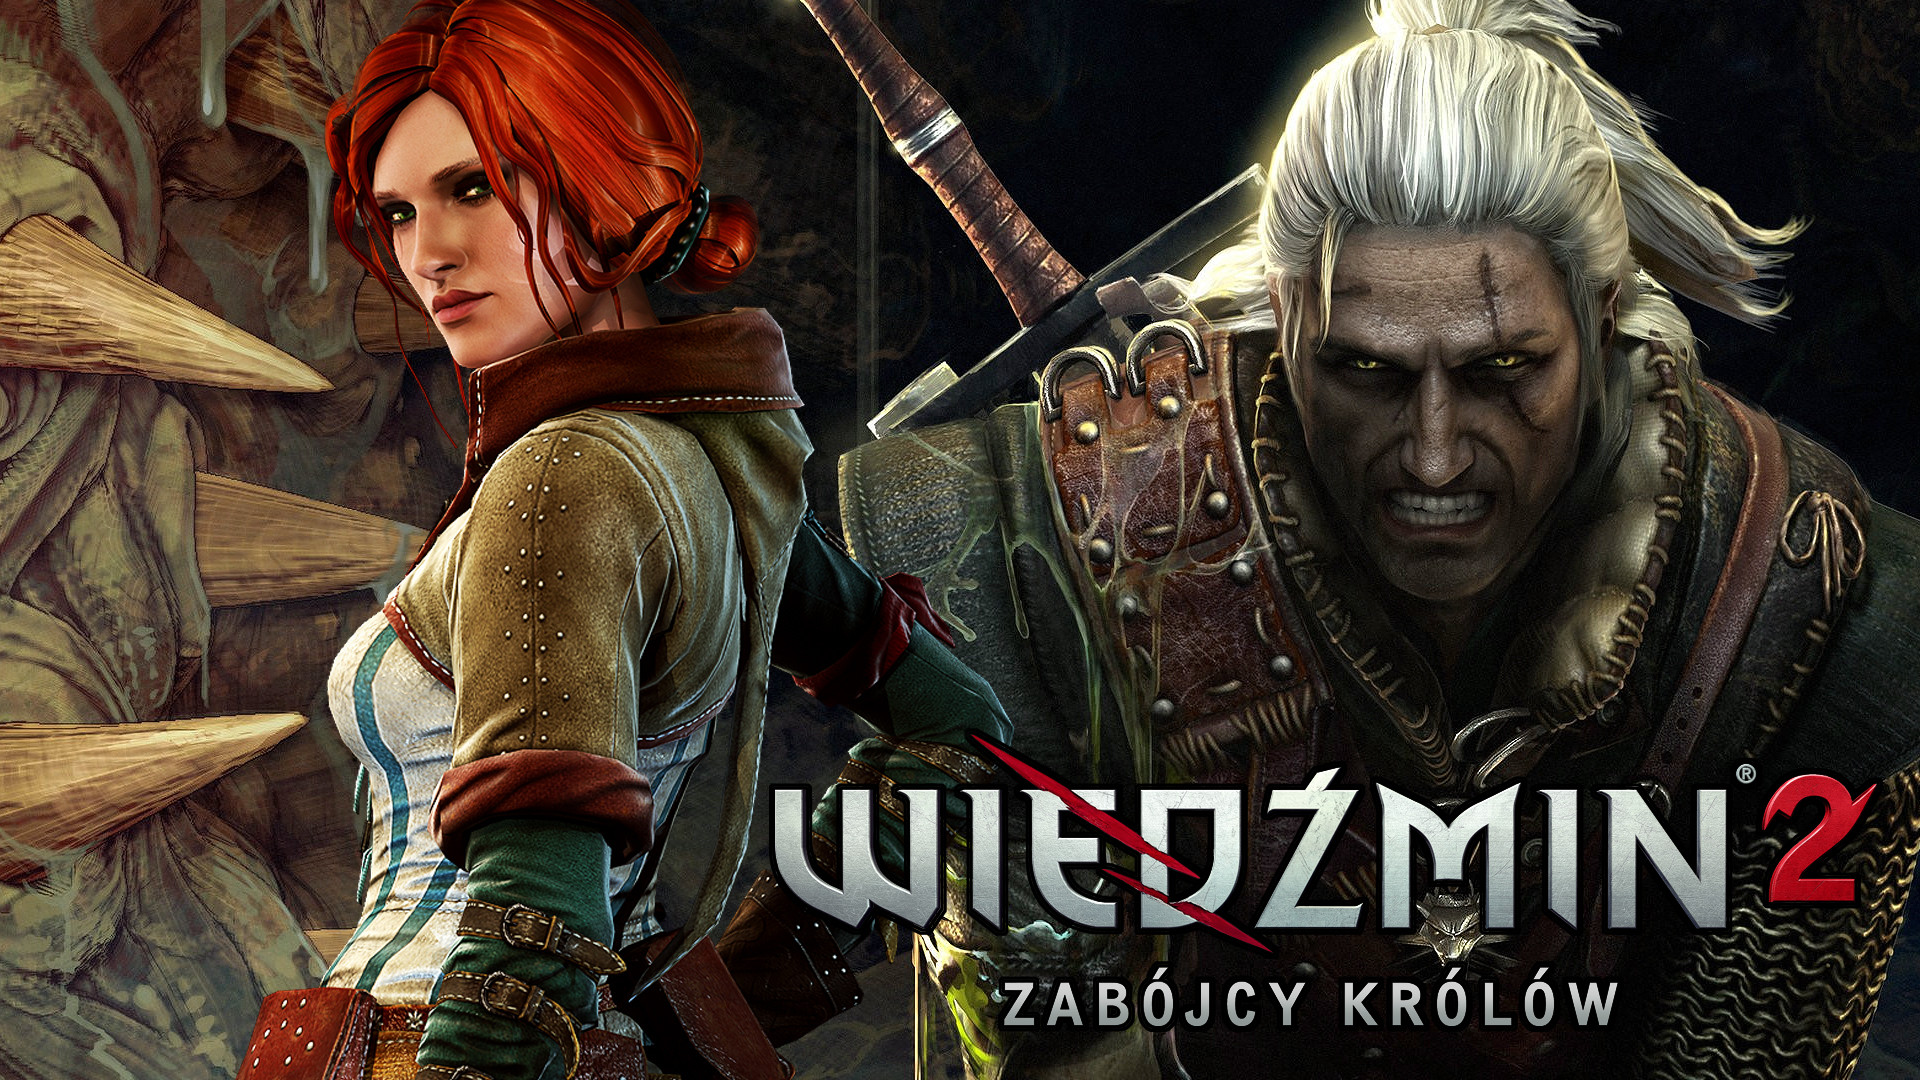 Triss Merigold and Geralt  The Witcher 2 wallpaper  Game wallpapers   19015